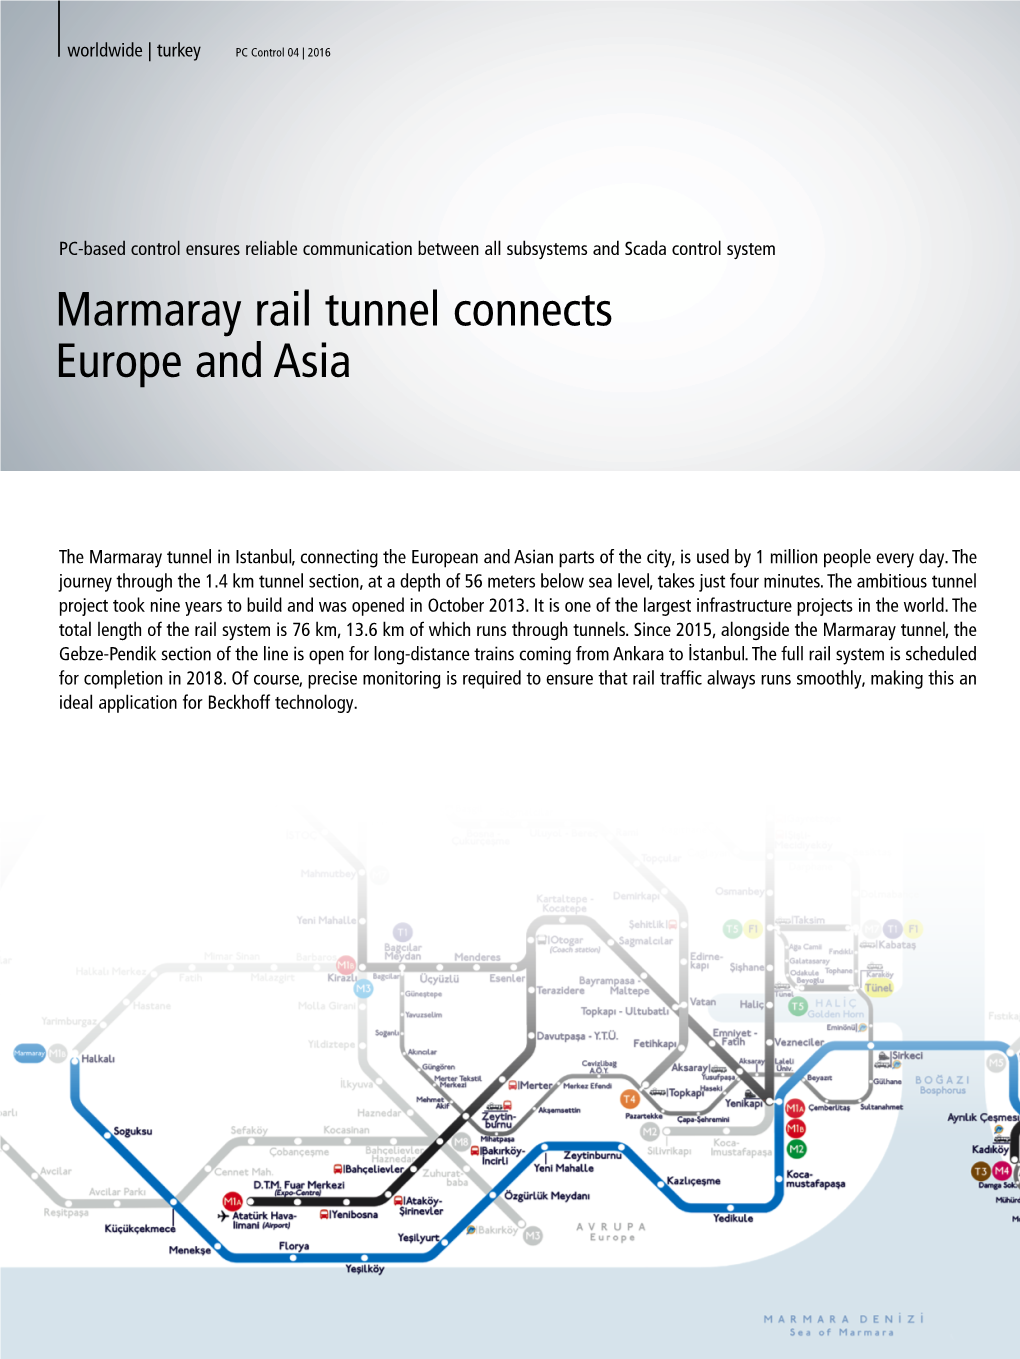 PC-Based Control Ensures Reliable Communication Between All Subsystems and Scada Control System Marmaray Rail Tunnel Connects Europe and Asia